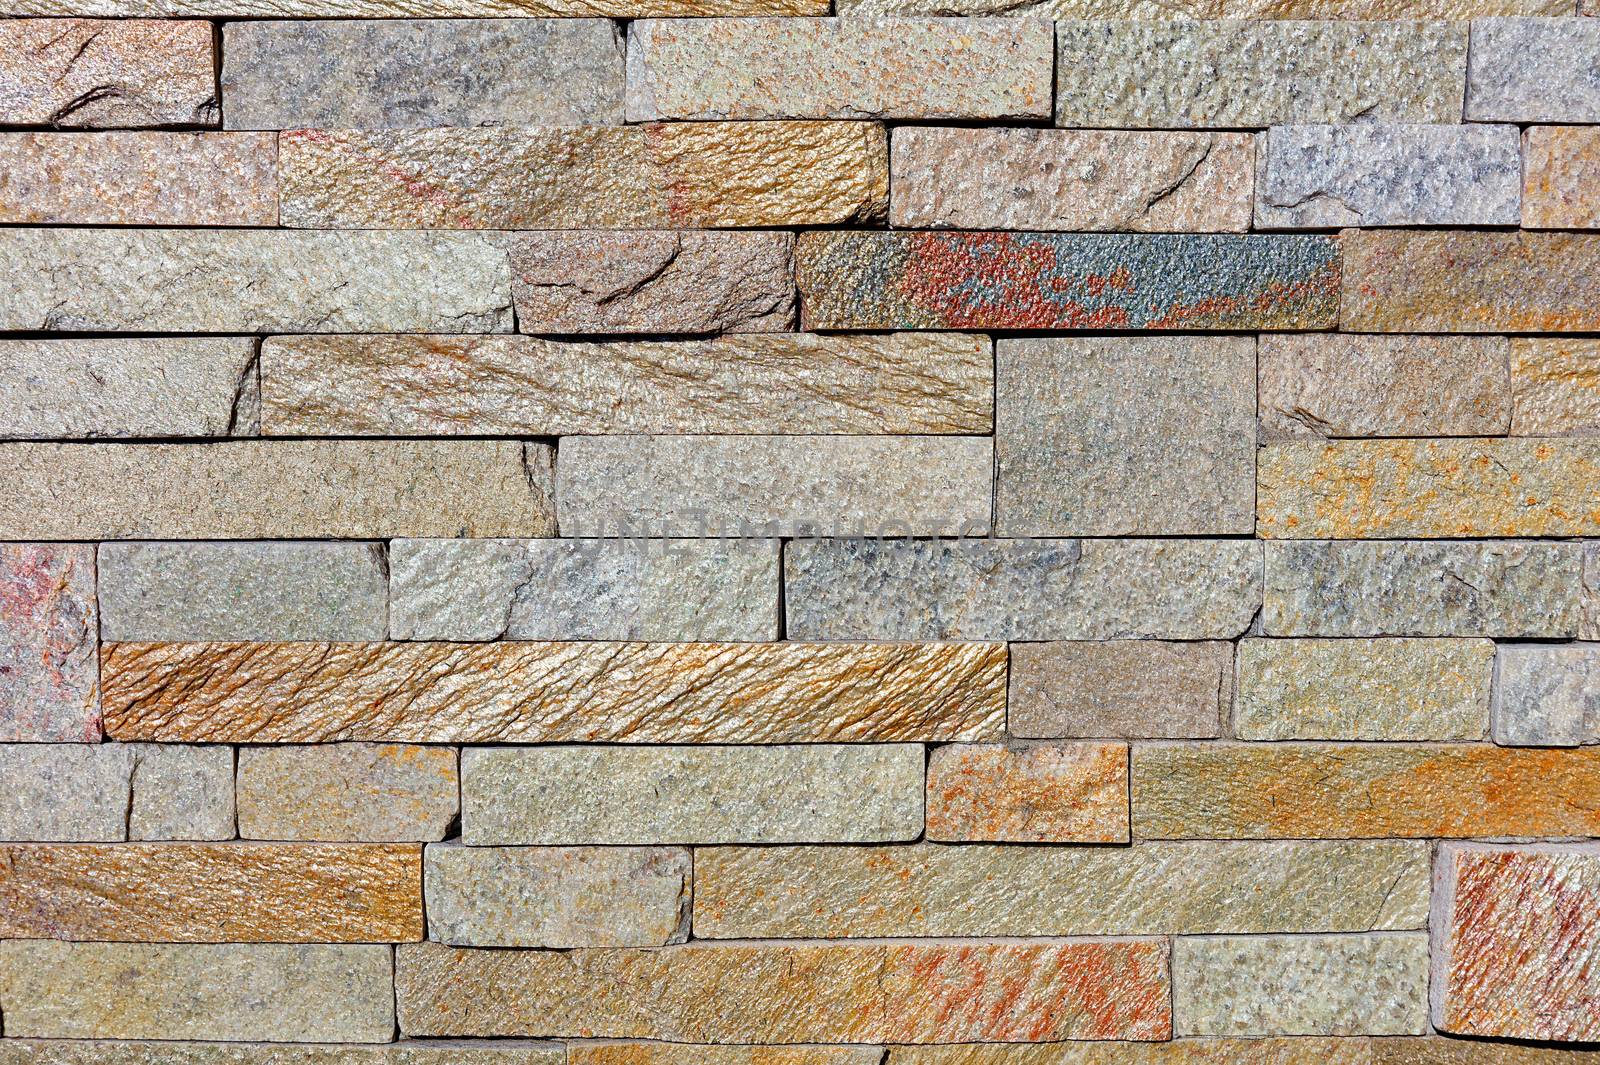 Background and texture of a wall made of shiny, rough, yellow-green sandstone tiles, close-up.